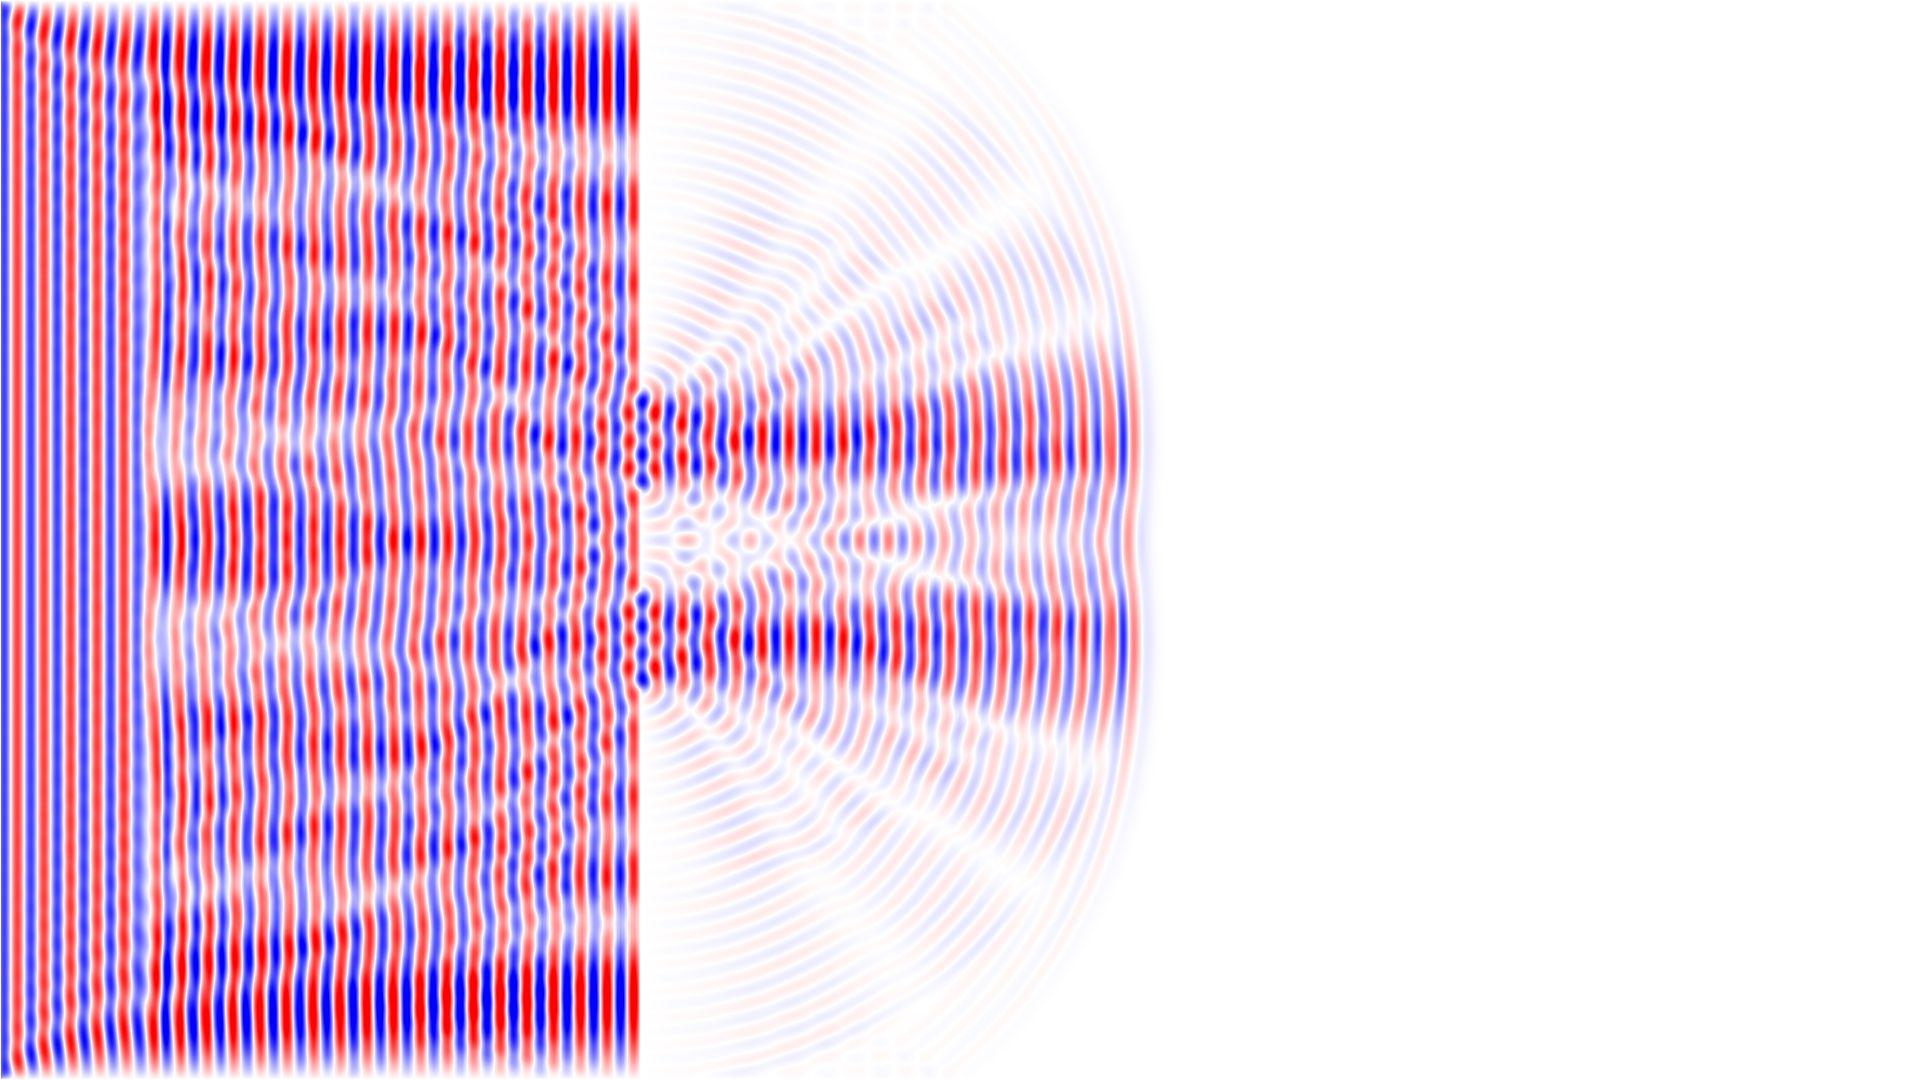 Screenshot of the Double Slit Experiment